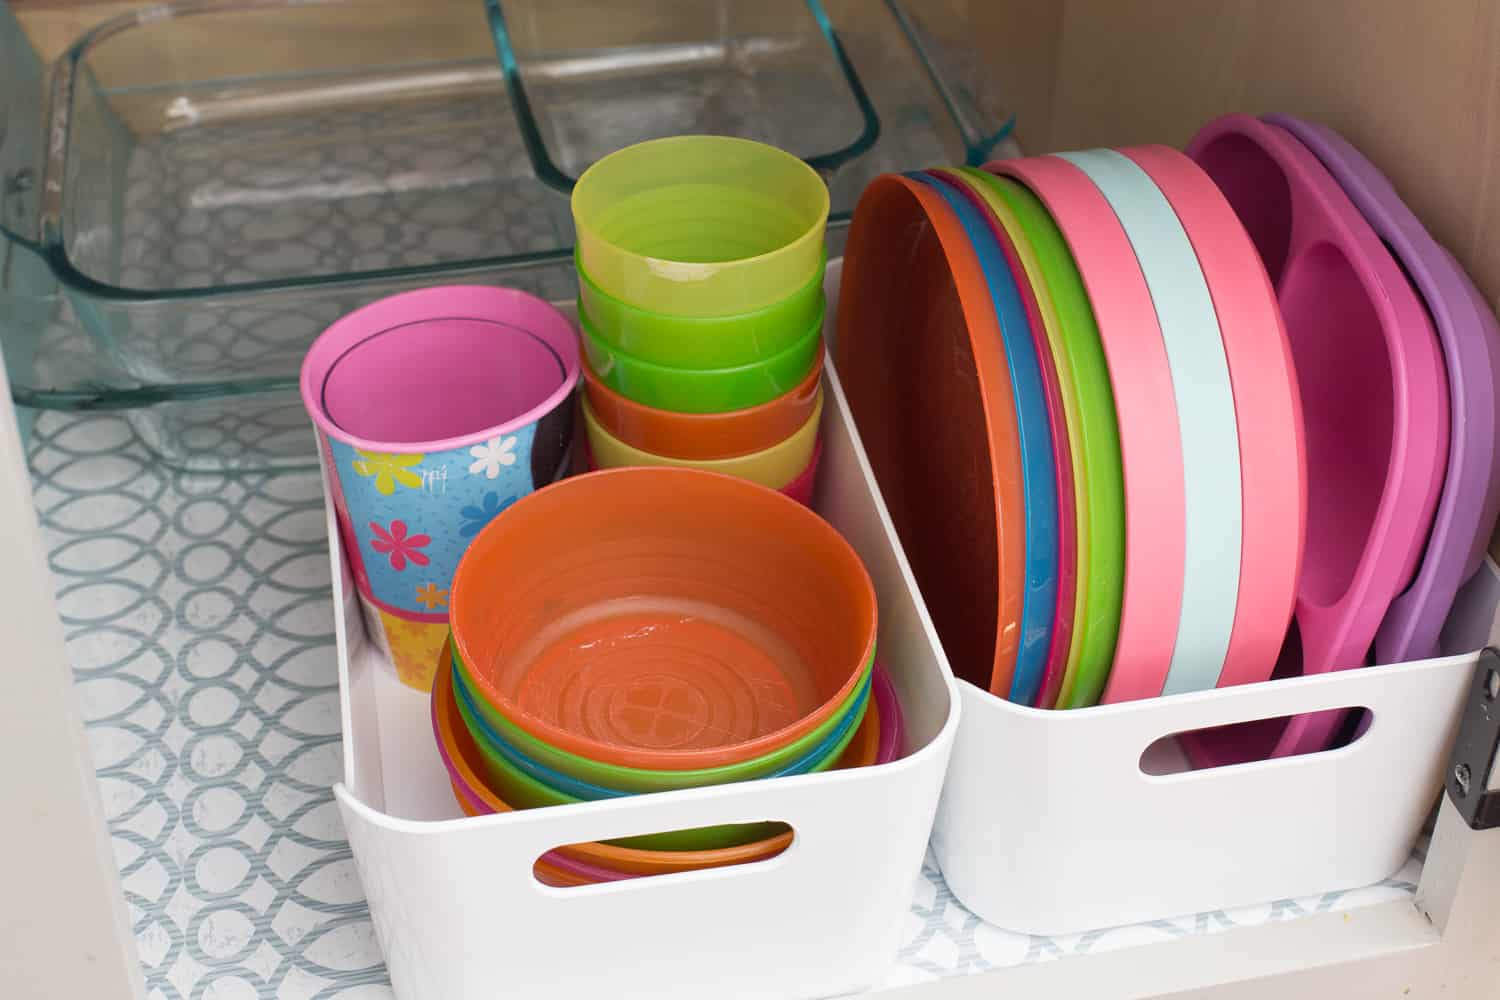 Bins to organize lids and kid dishes